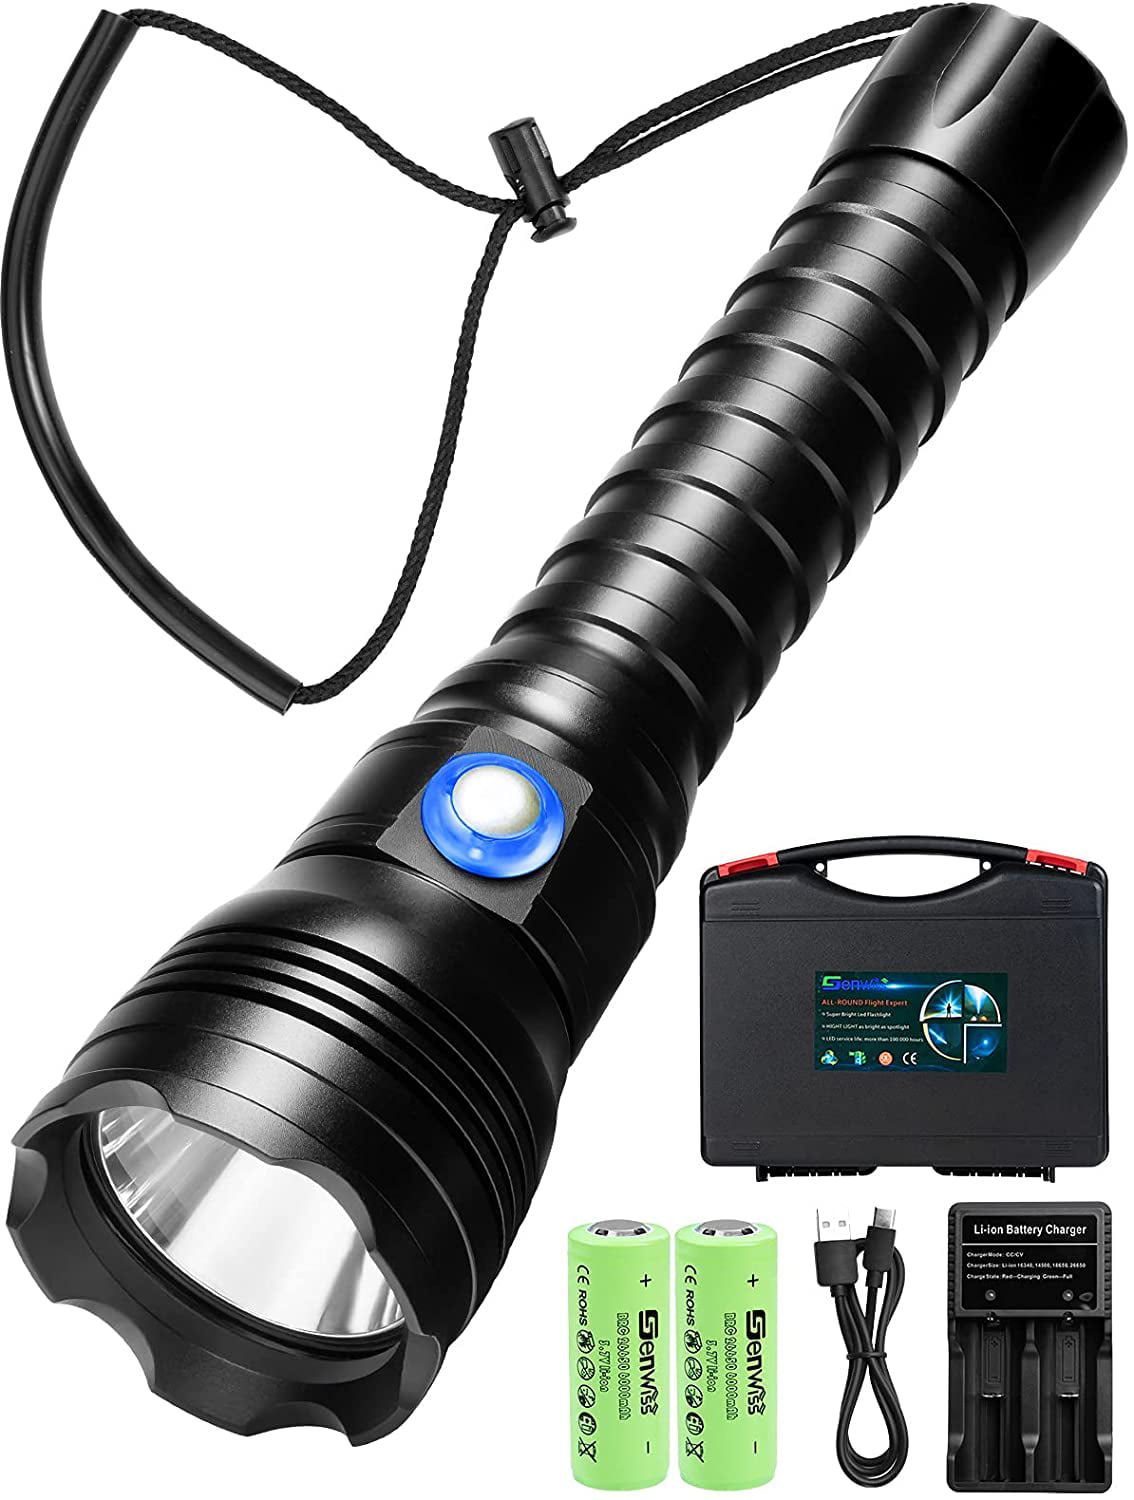 Genwiss Scuba Diving Light High Lumens Underwater Flashlight with Battery for Night Dive